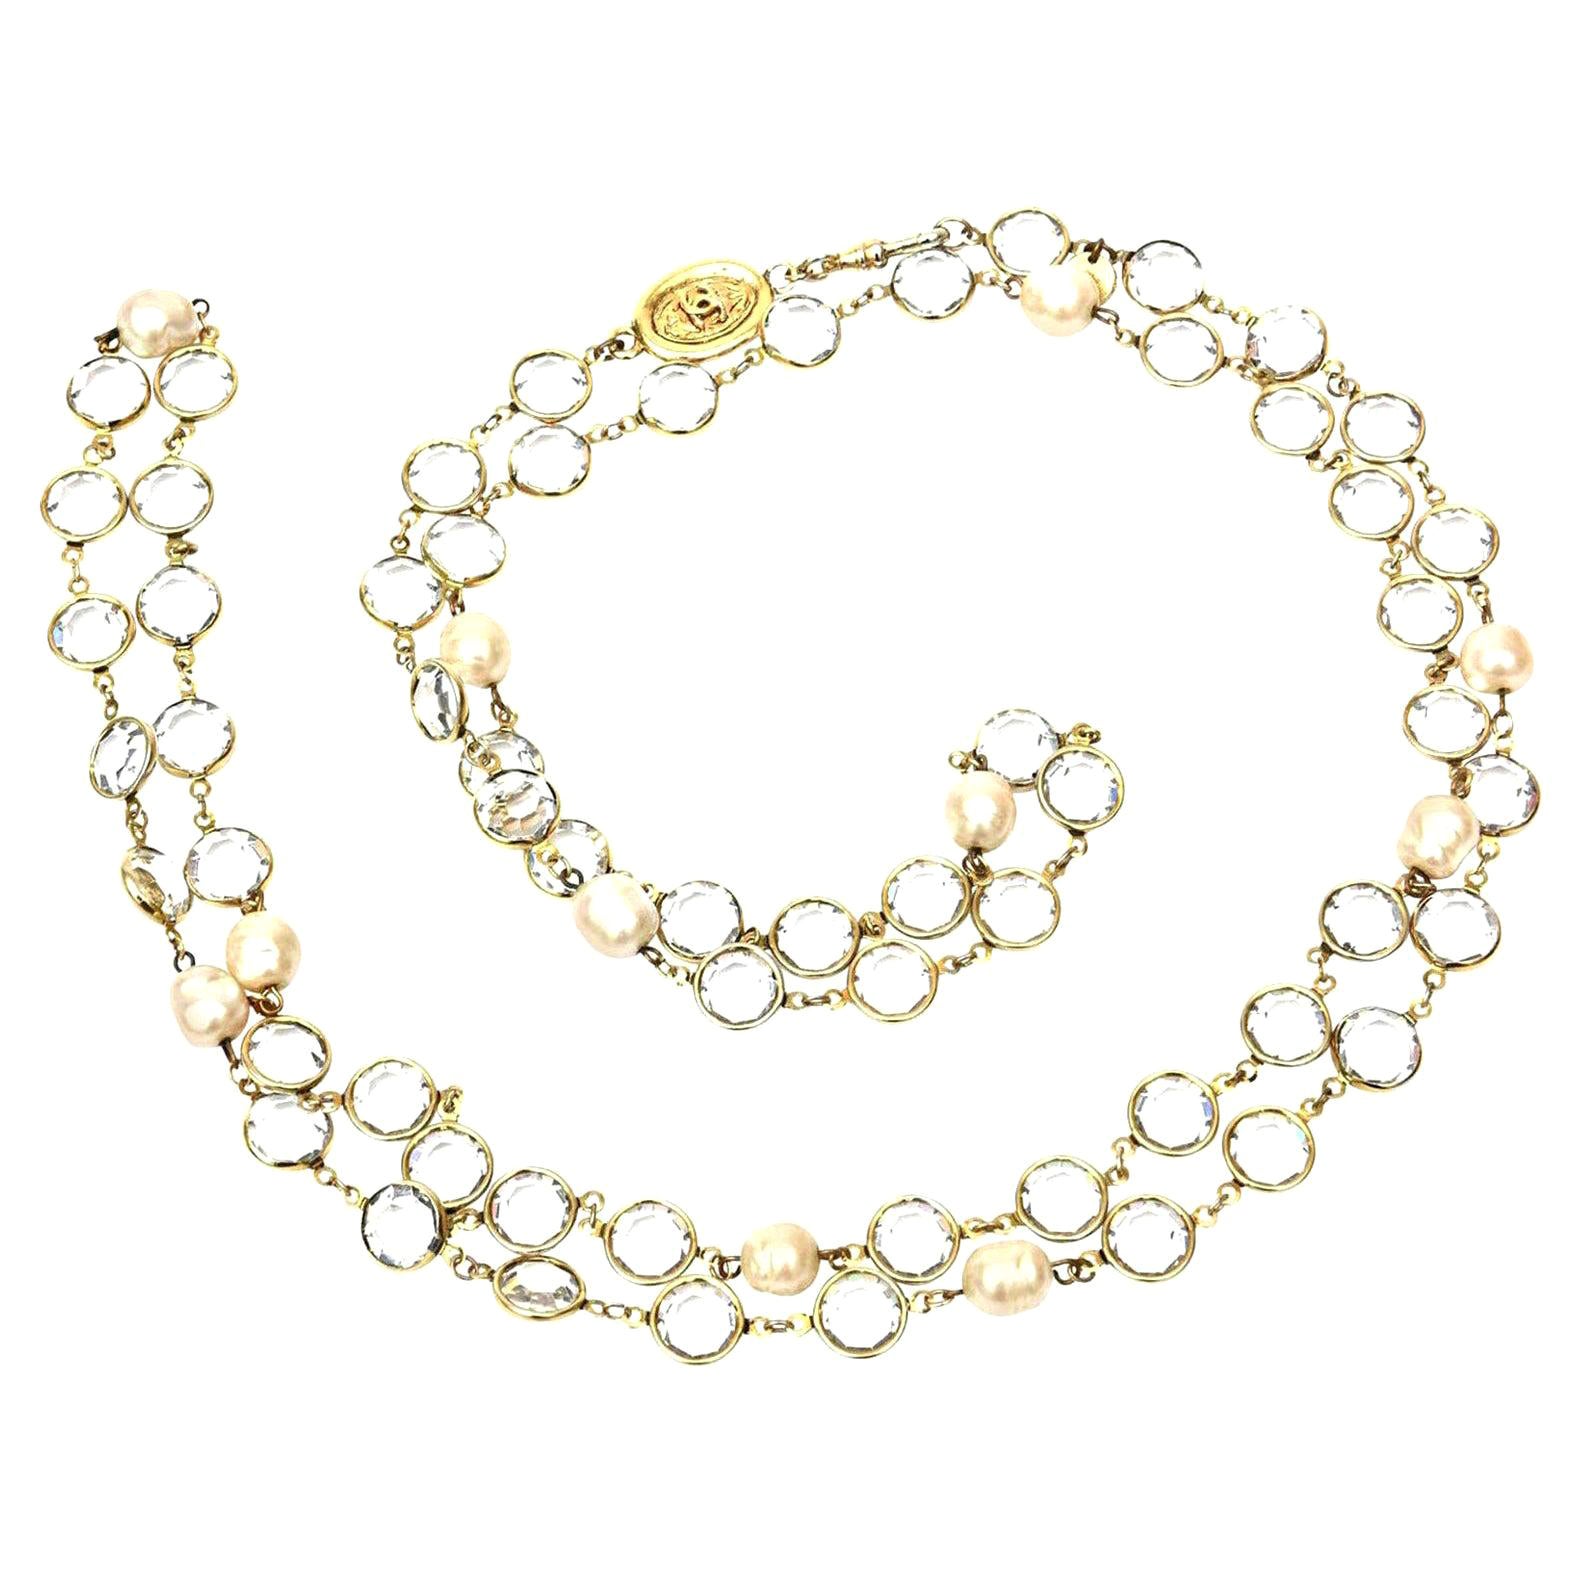 Chanel Vintage Faux Pearl and Bevel Clear Crystal Wrap Necklace For Sale